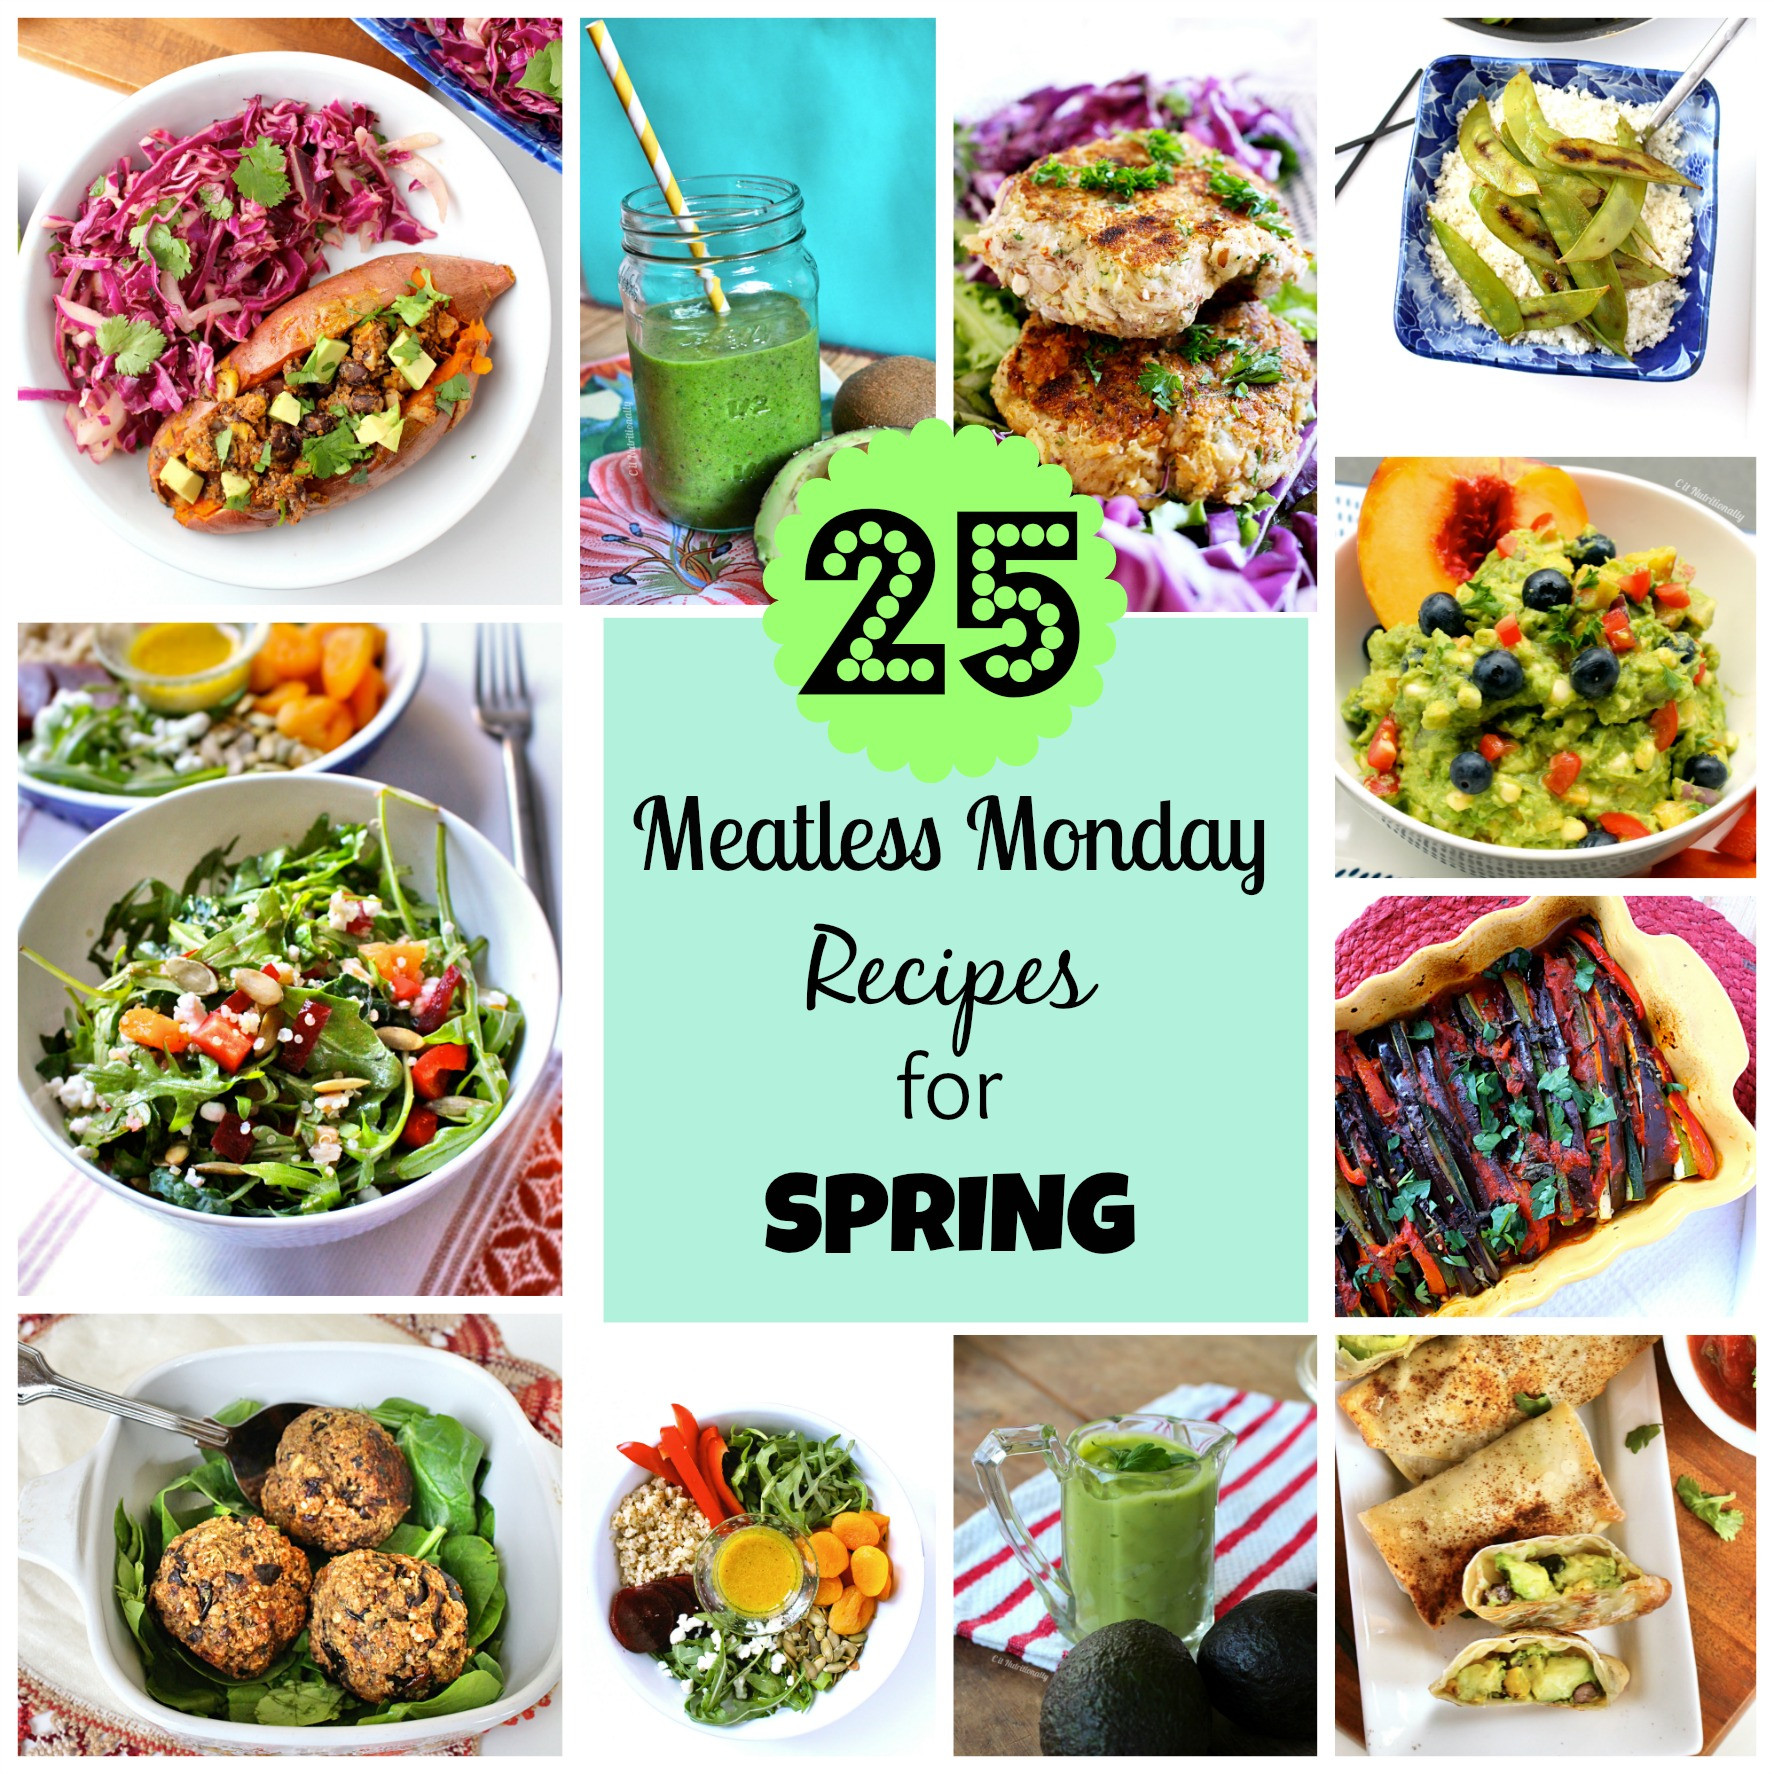 Spring Vegetarian Recipes
 25 Meatless Monday Recipes for SPRING C it Nutritionally